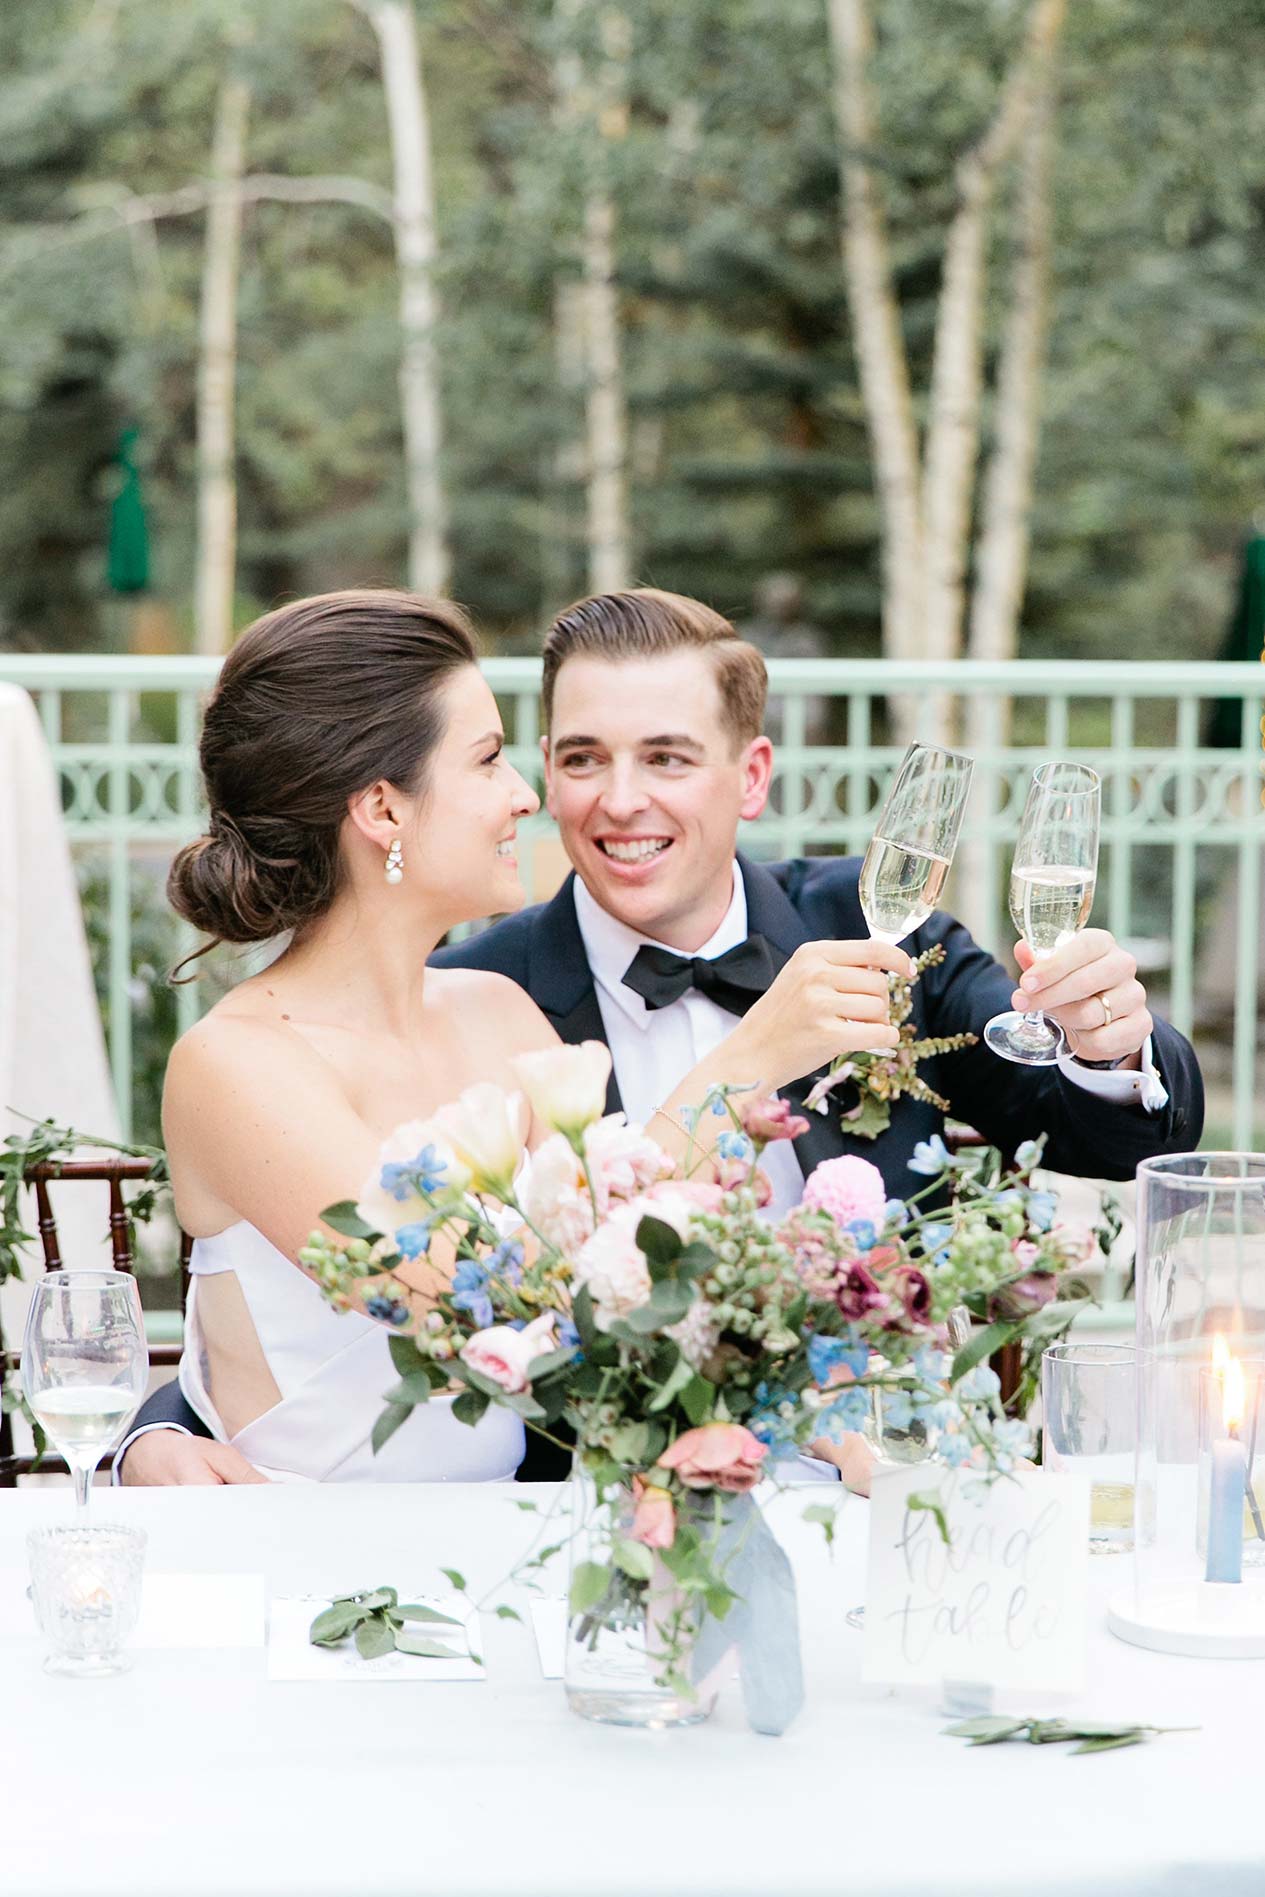 Bride and groom sitting at table, holding champagne glasses